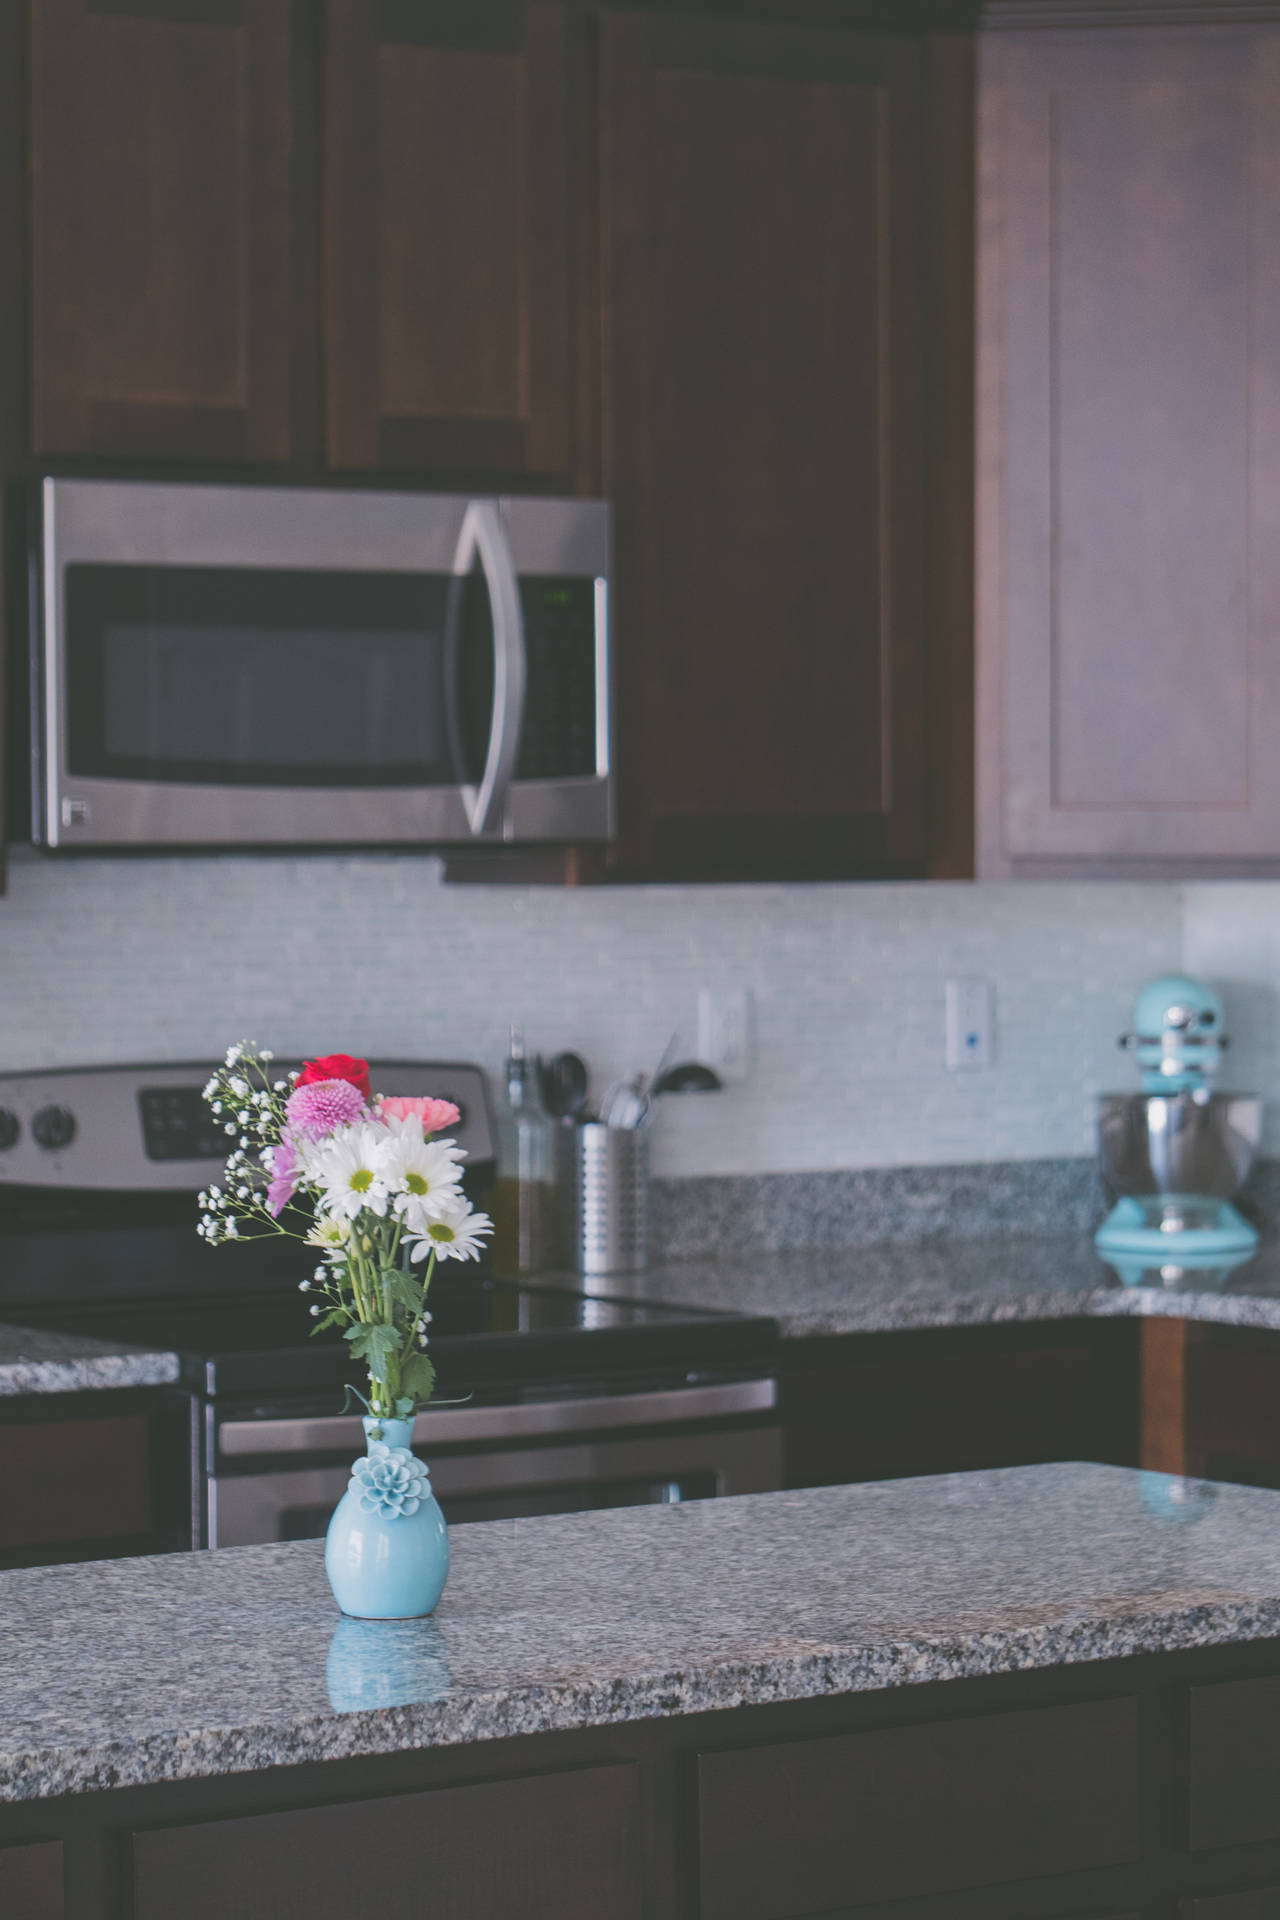 Stylish Kitchen Design With An Aesthetic Flower Vase On A Grey Marble Countertop Background